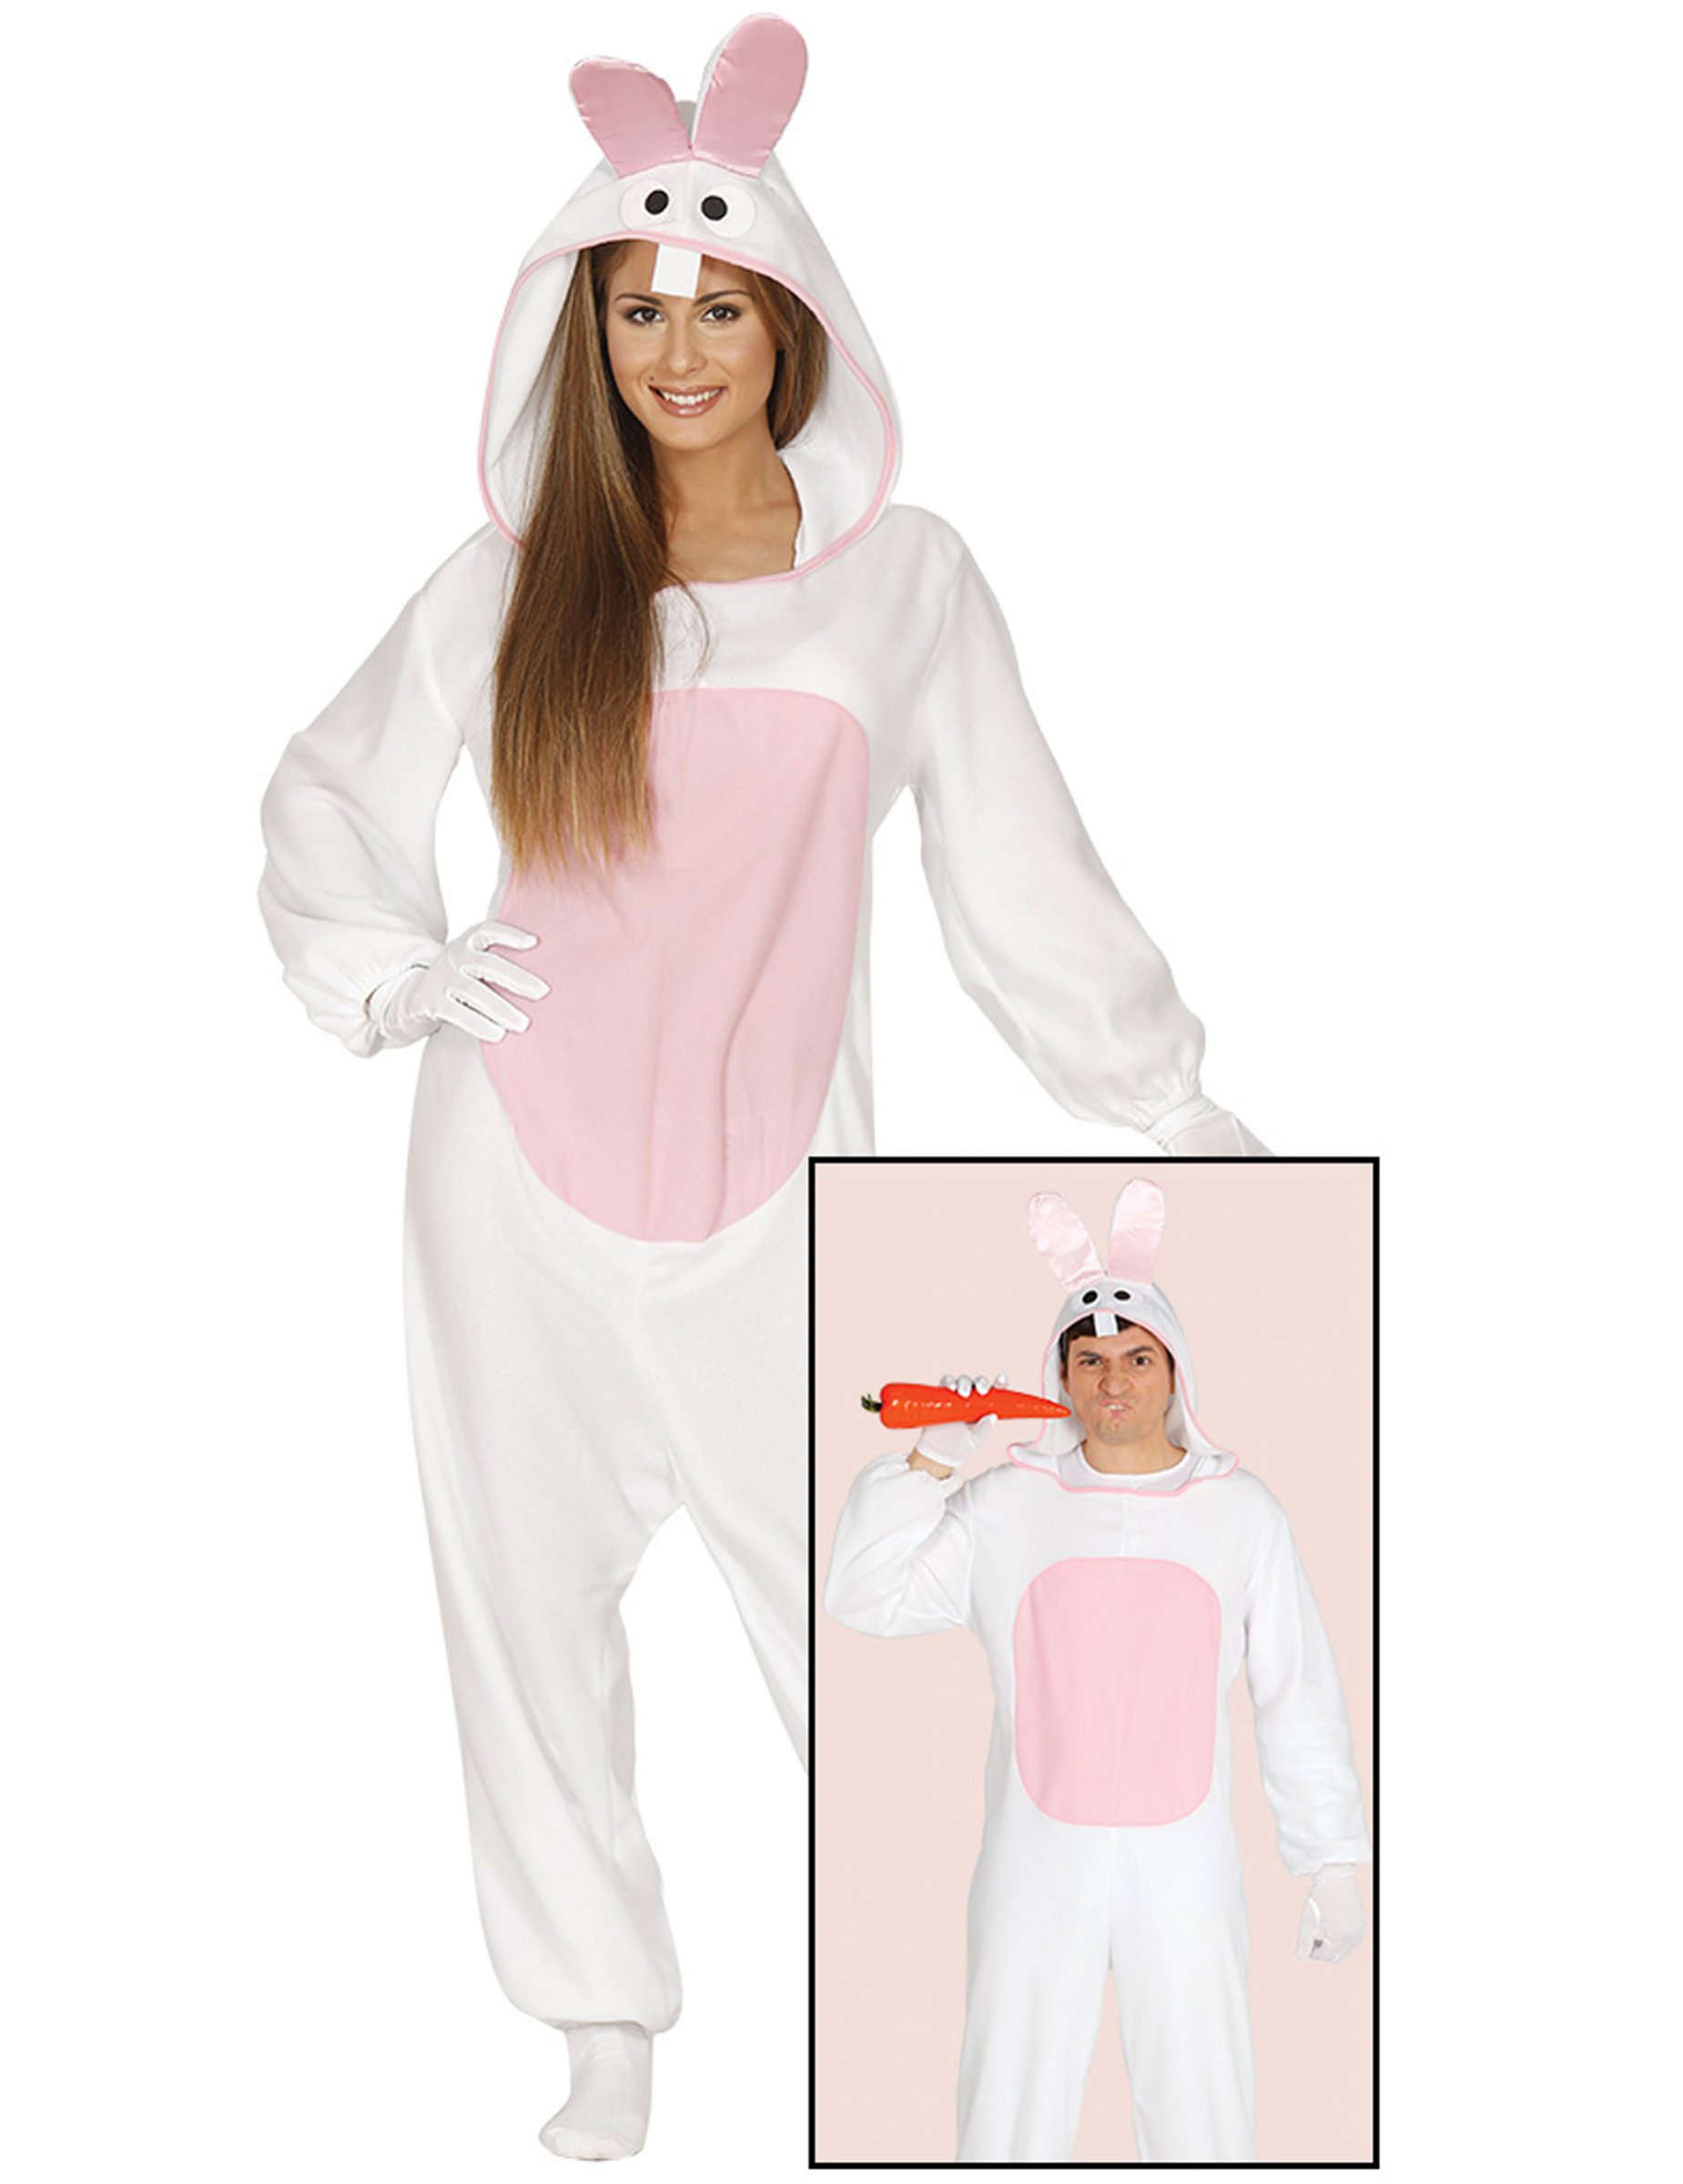 Costume adulte luxe lapin